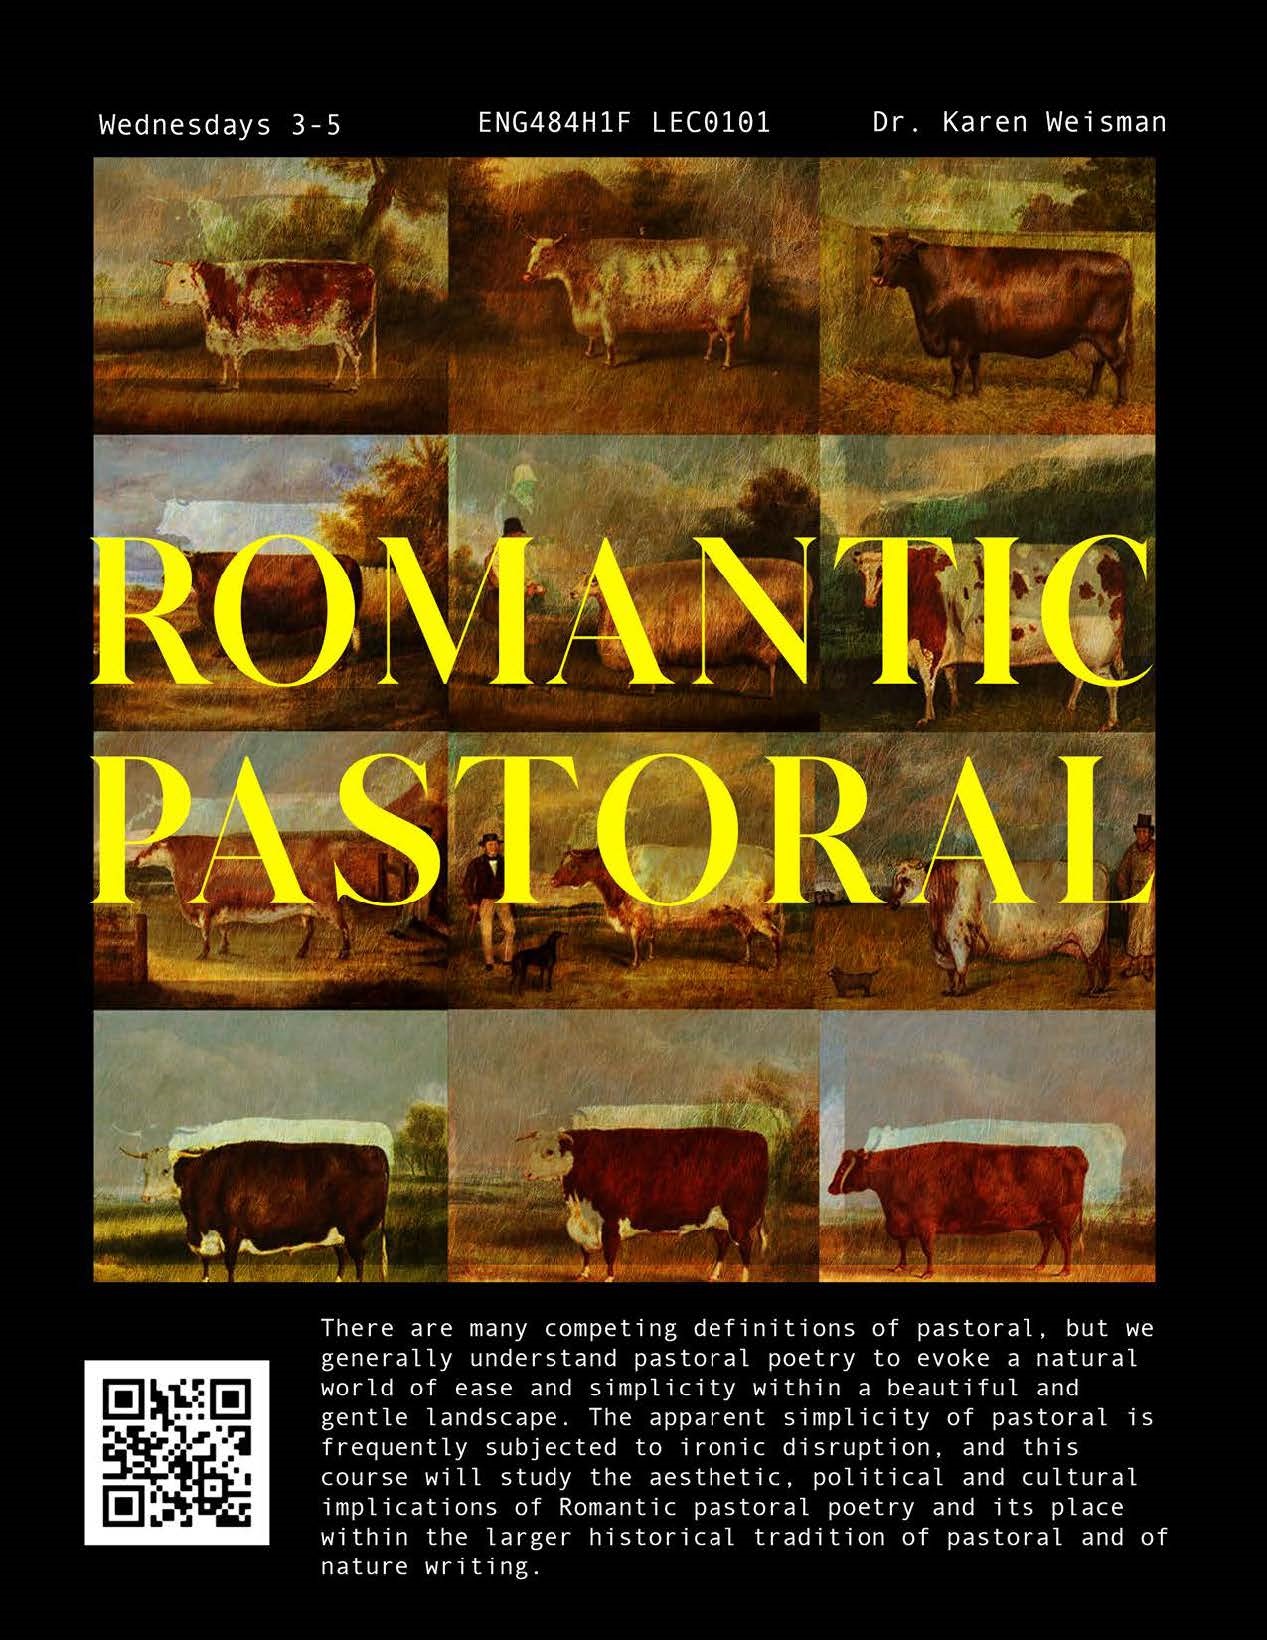 A poster with repeating images of cows